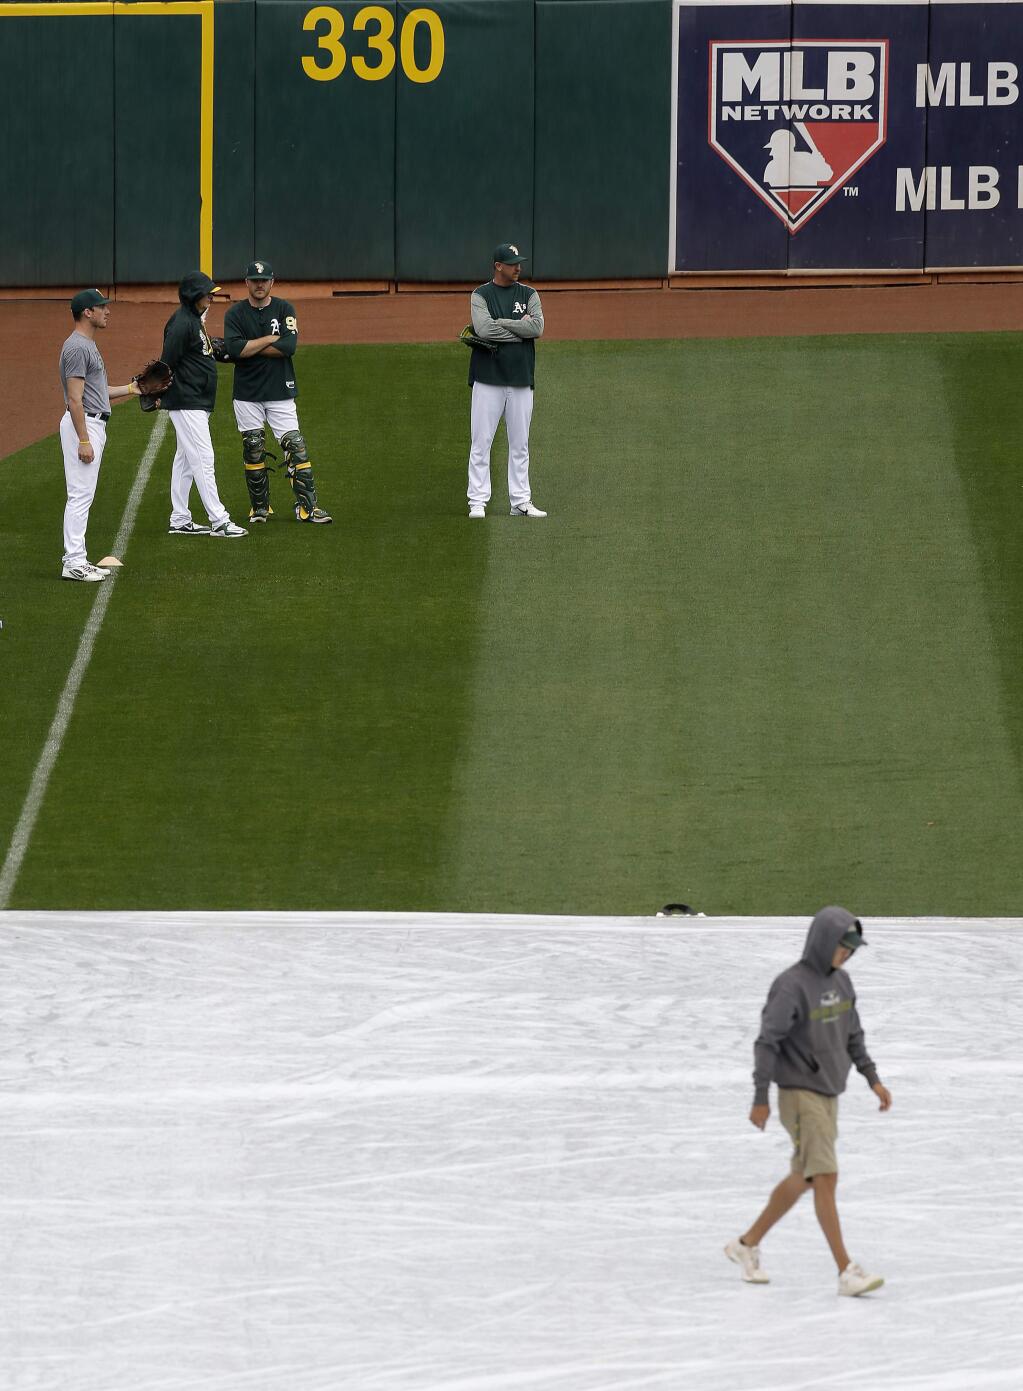 Oakland Athletics players prepare for Sunday's game against the Houston Astros as a groundskeeper walks on a tarp covering the infield. The game was eventually rained out. (AP Photo/Ben Margot)